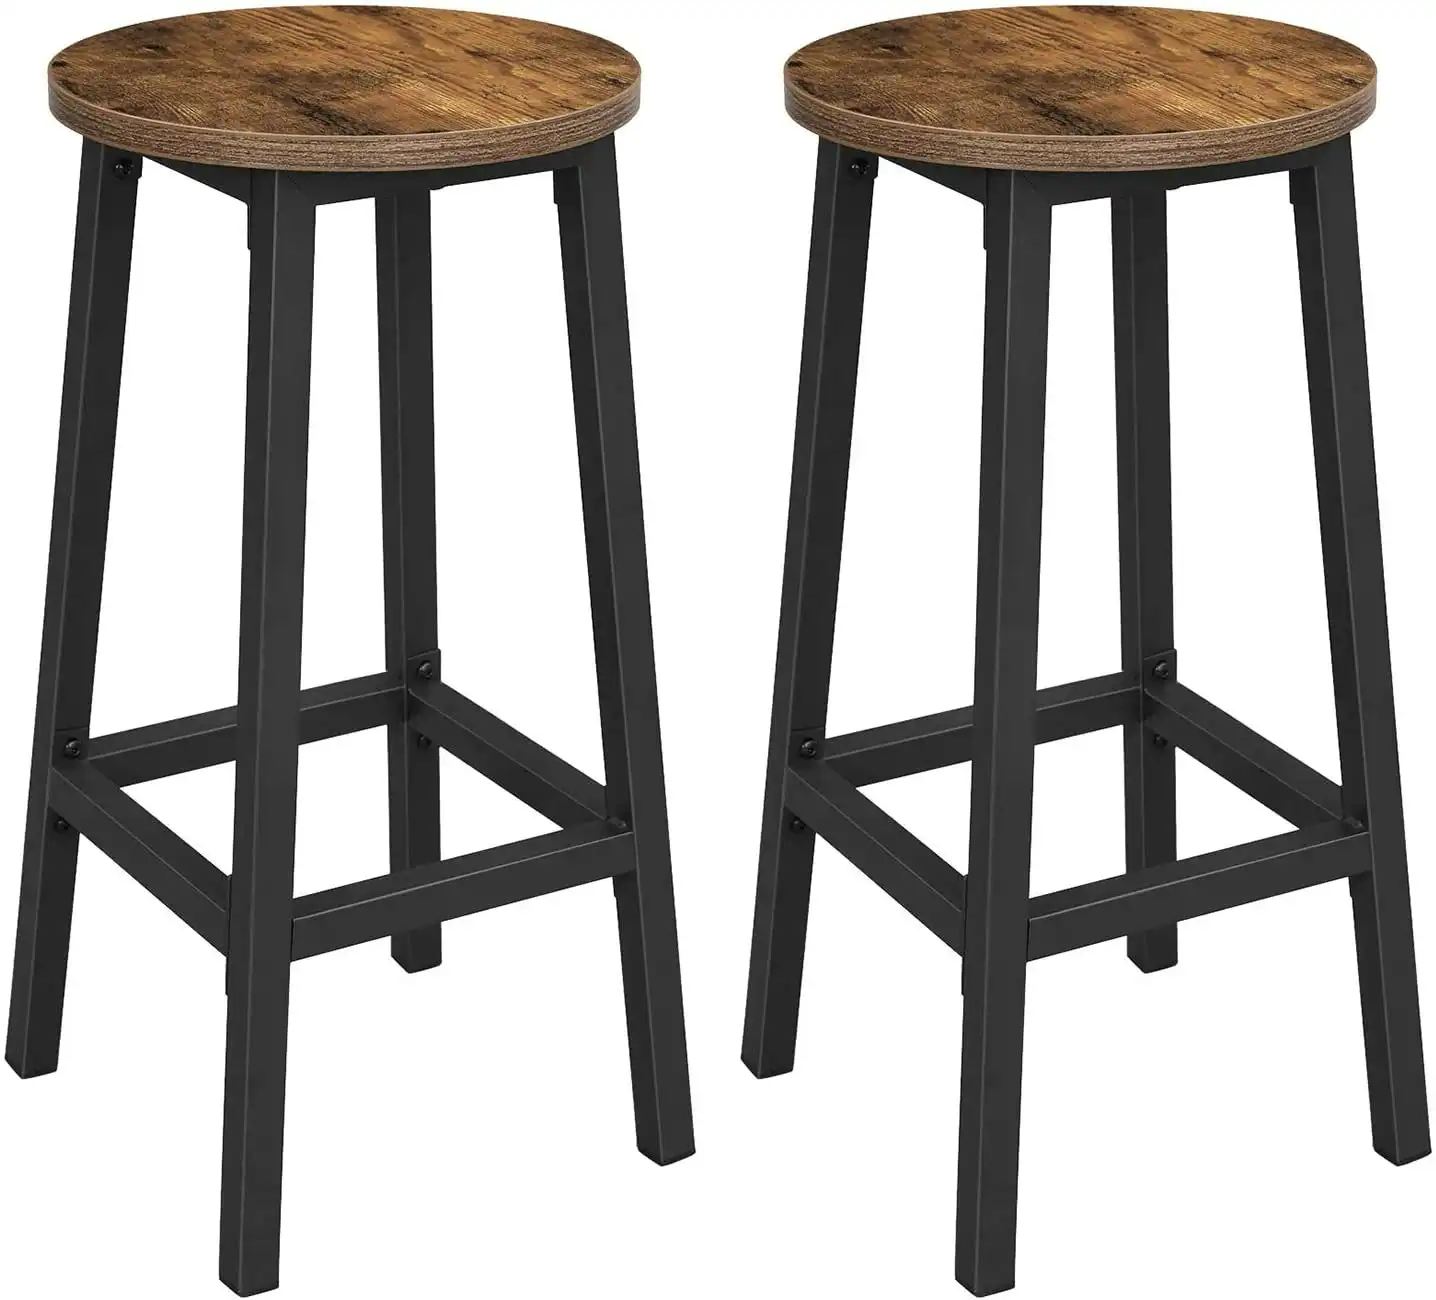 Set of 2 Bar Stools with Sturdy Steel Frame Rustic Brown and Black,  65 cm Height